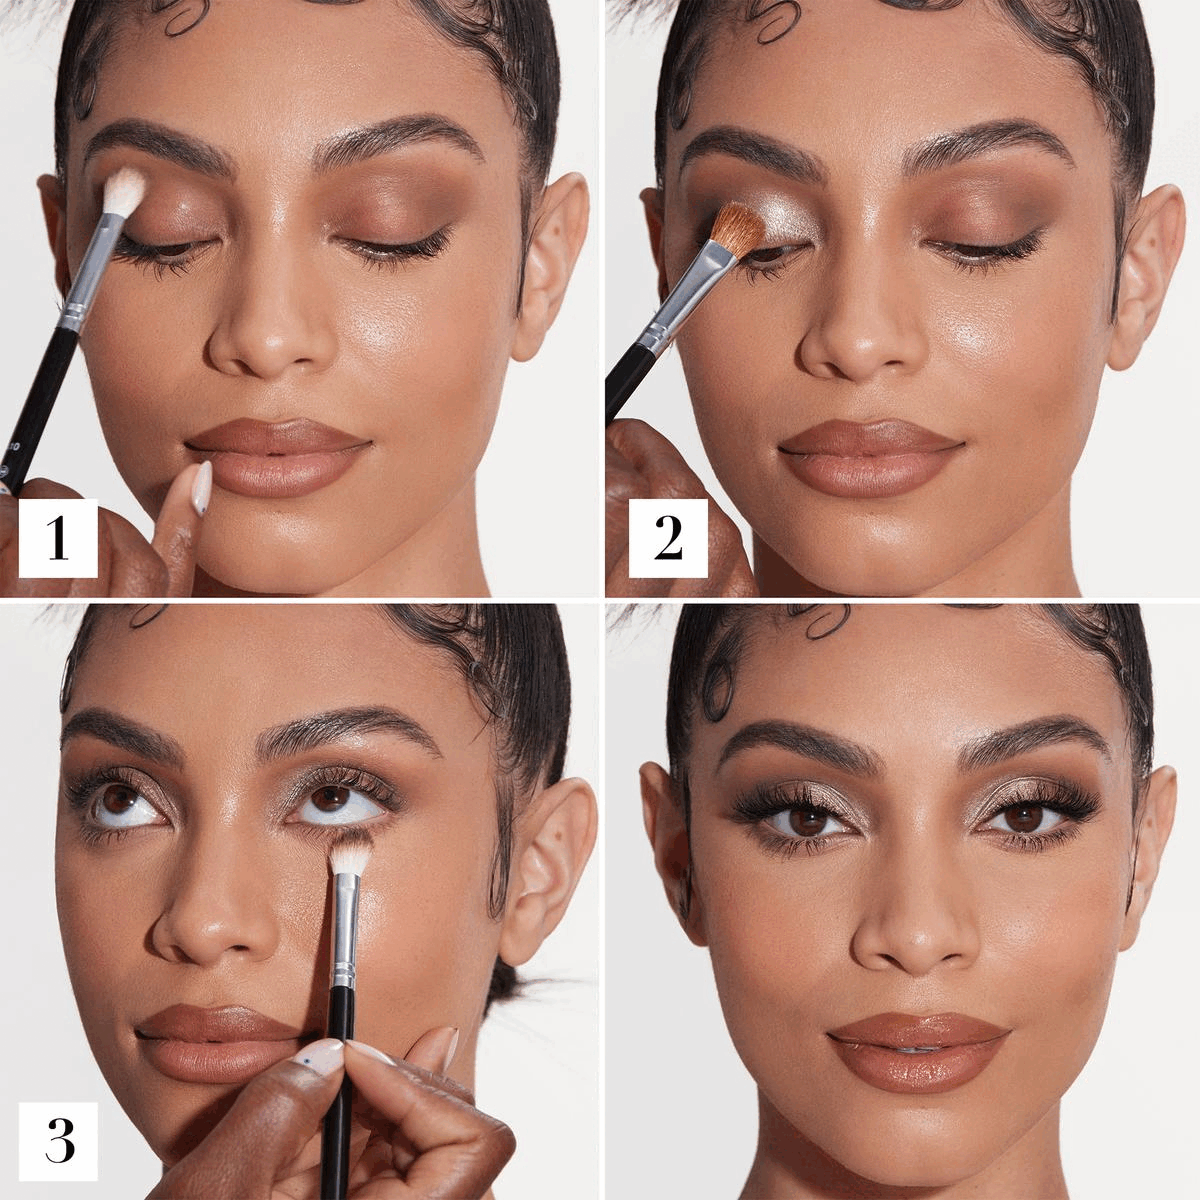 Image 1, a three step guide to eyeshadow look 1 Image 2, a three step guide to eyeshadow look 2 Image 3, a three step guide to eyeshadow look 3